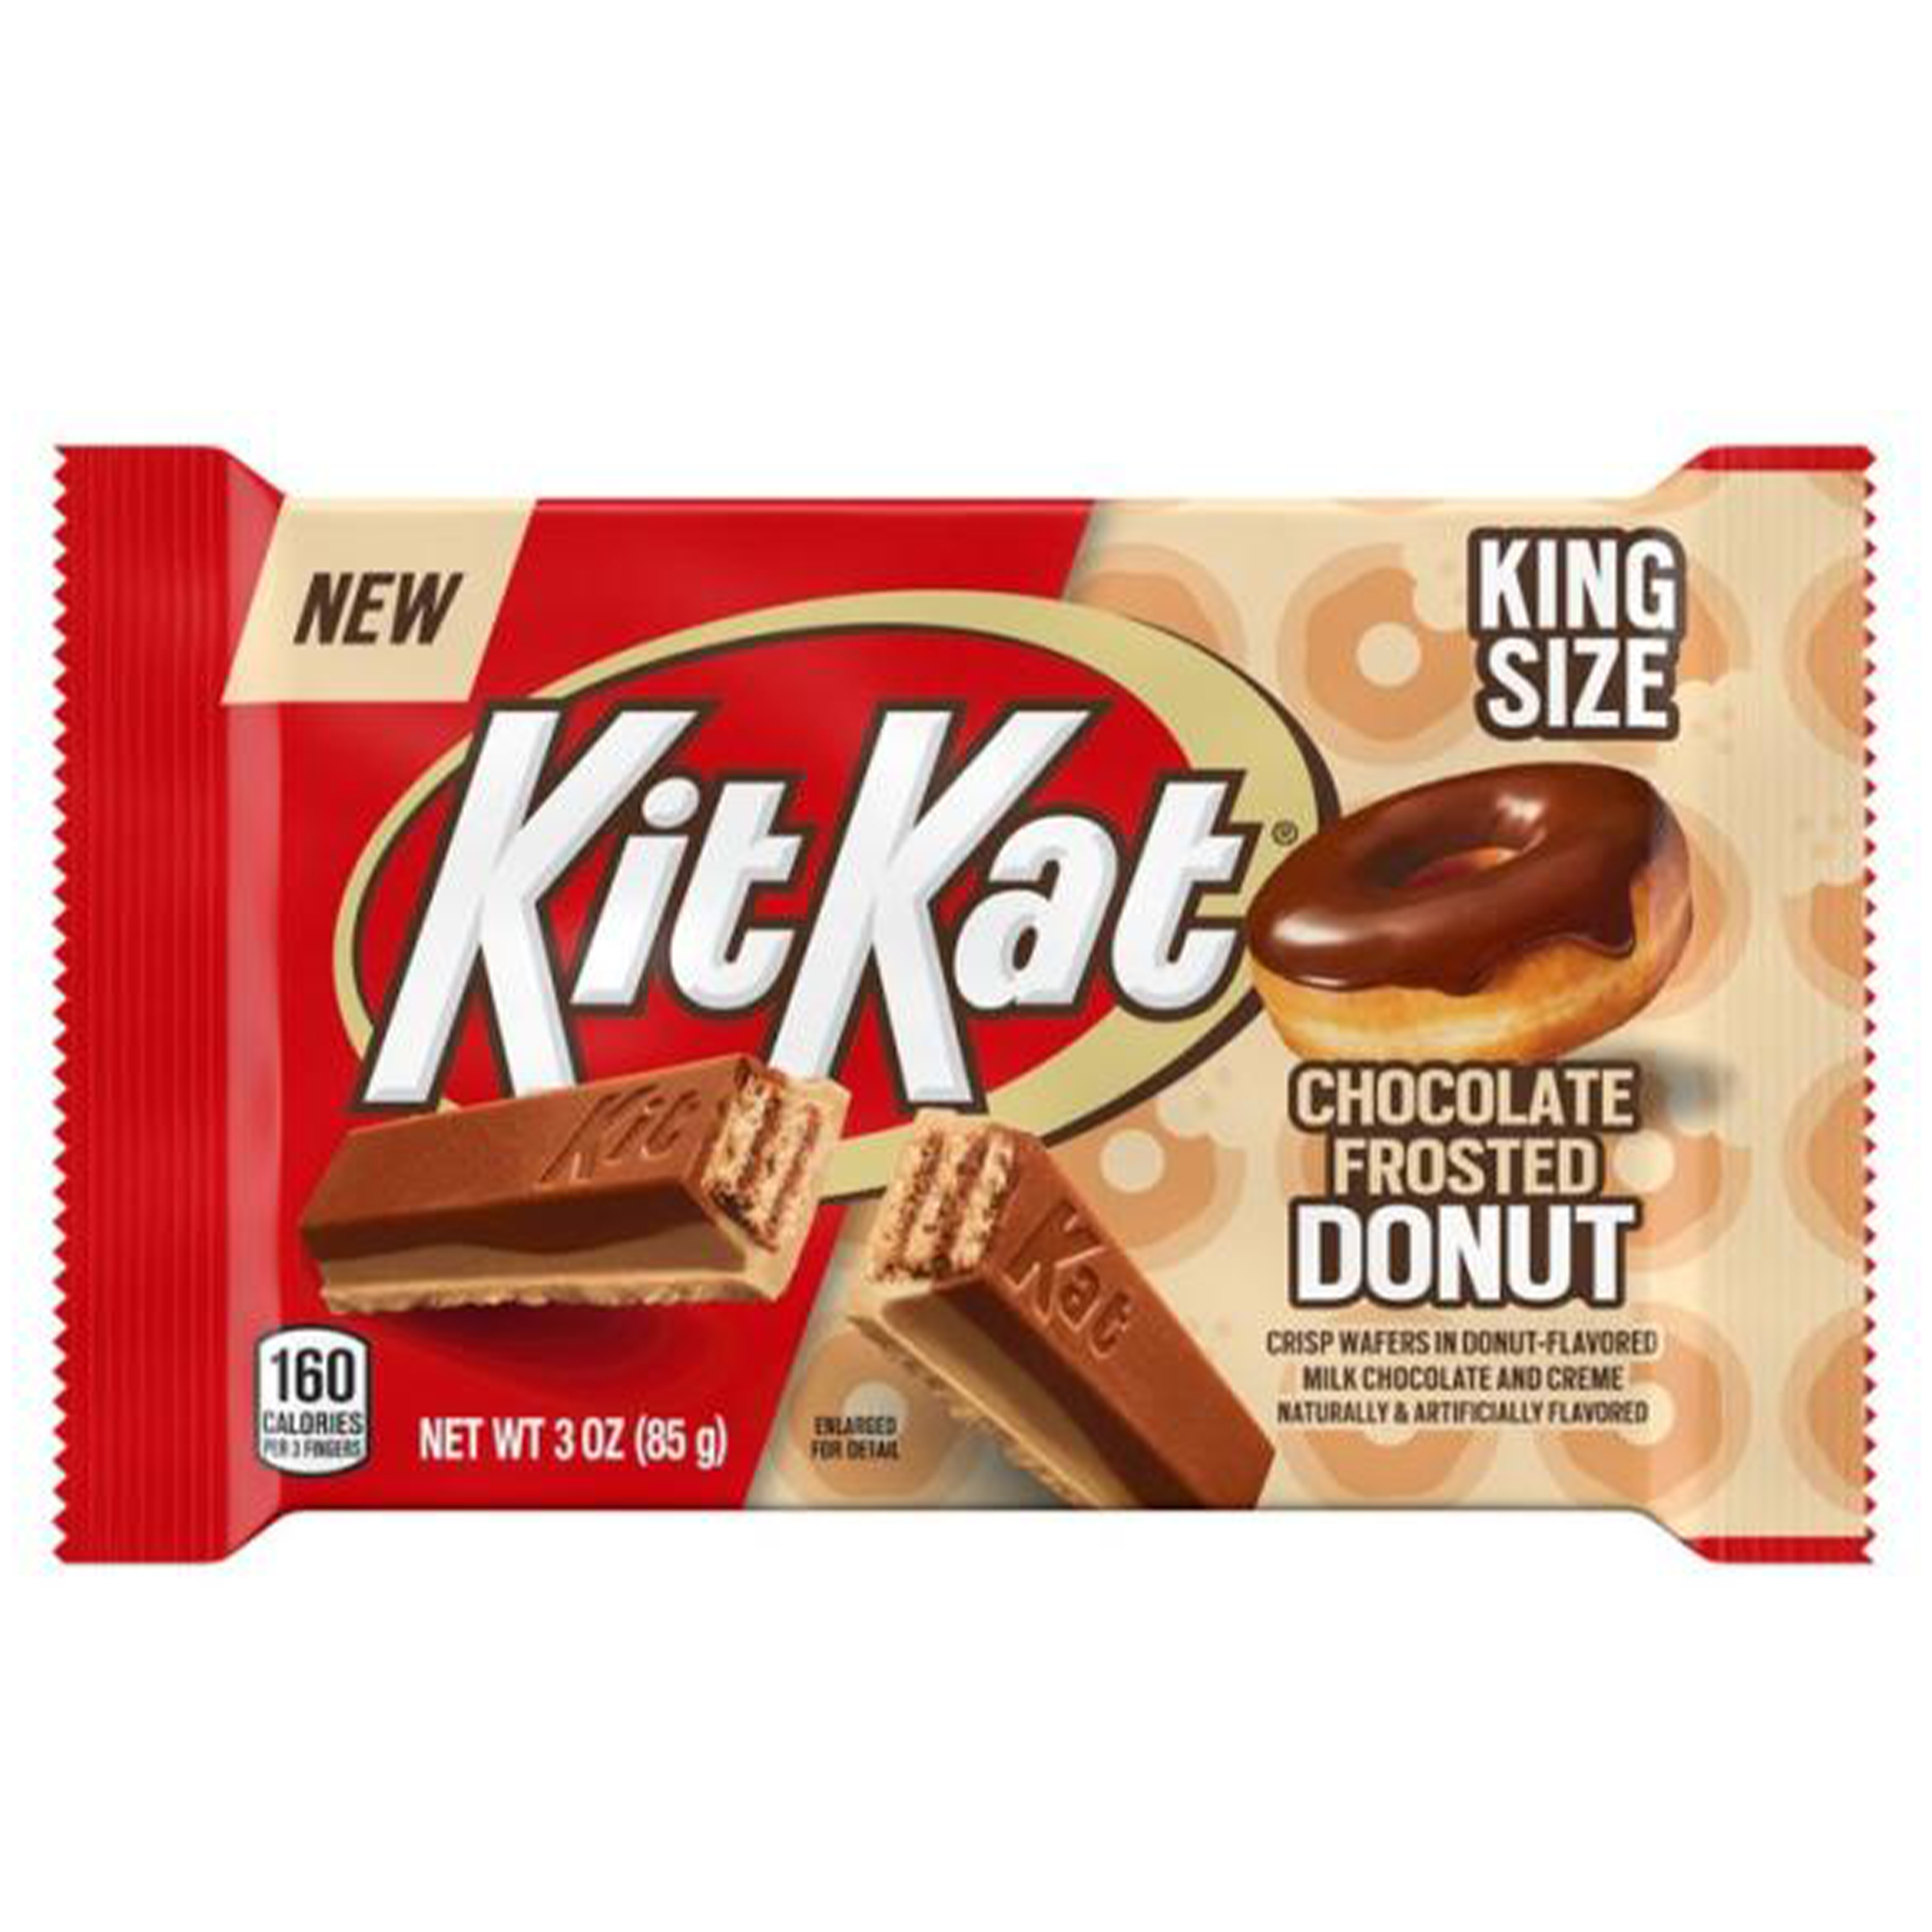 Kit Kat - Chocolate Frosted Donut (King Size)